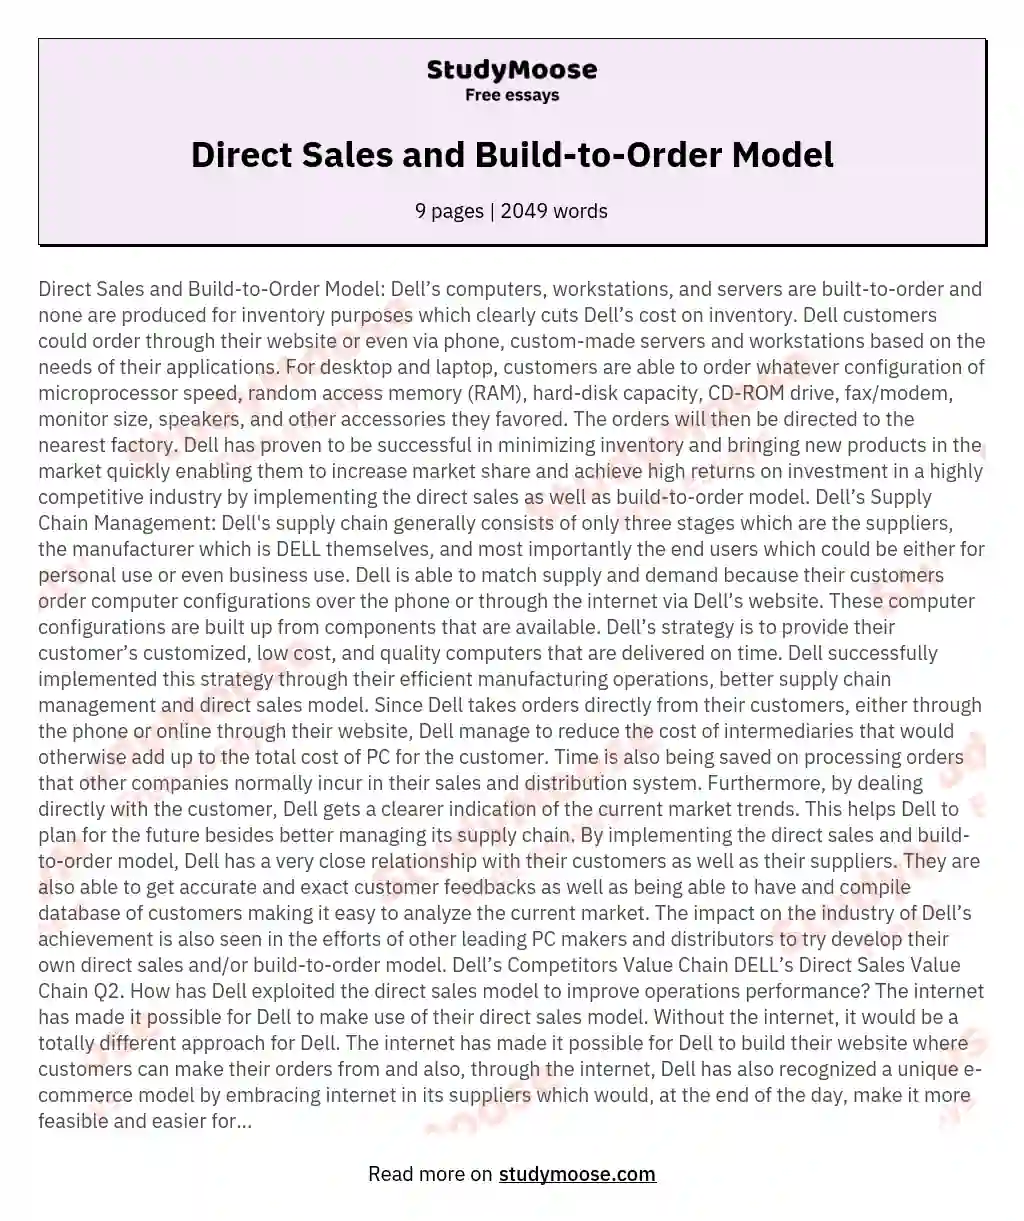 Direct Sales and Build-to-Order Model